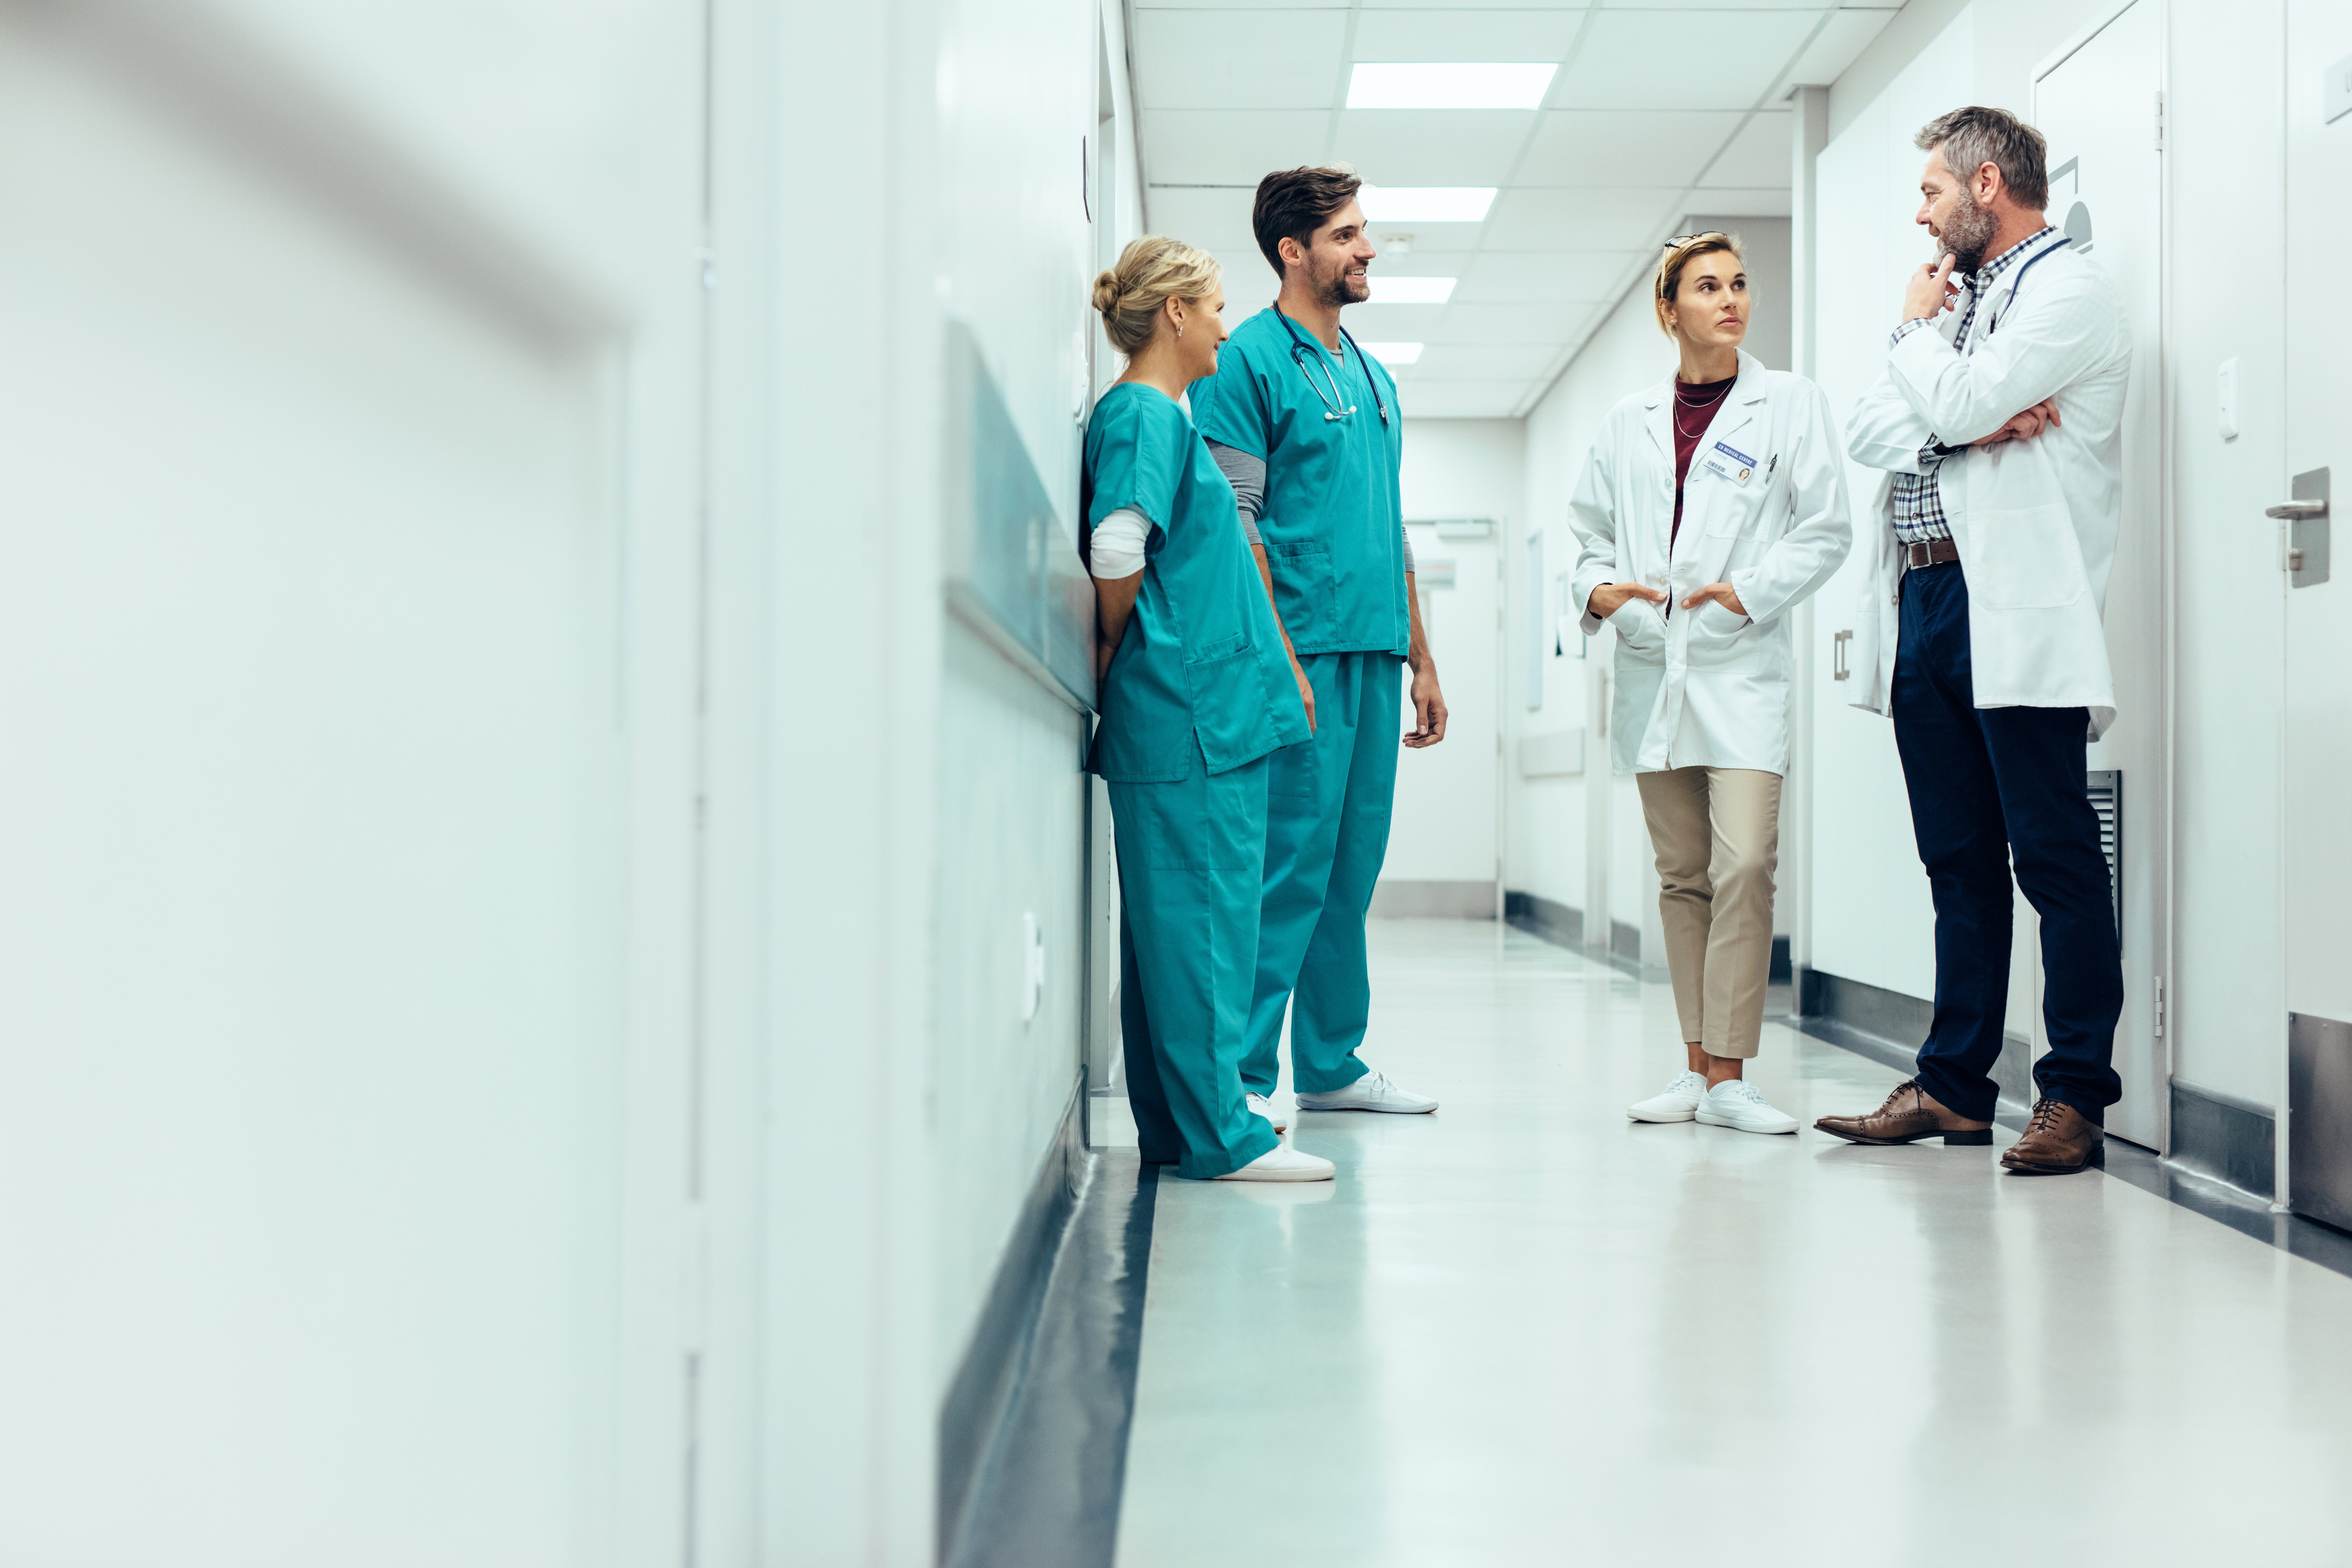 Doctors and nurses at hospital | Photo: Shutterstock